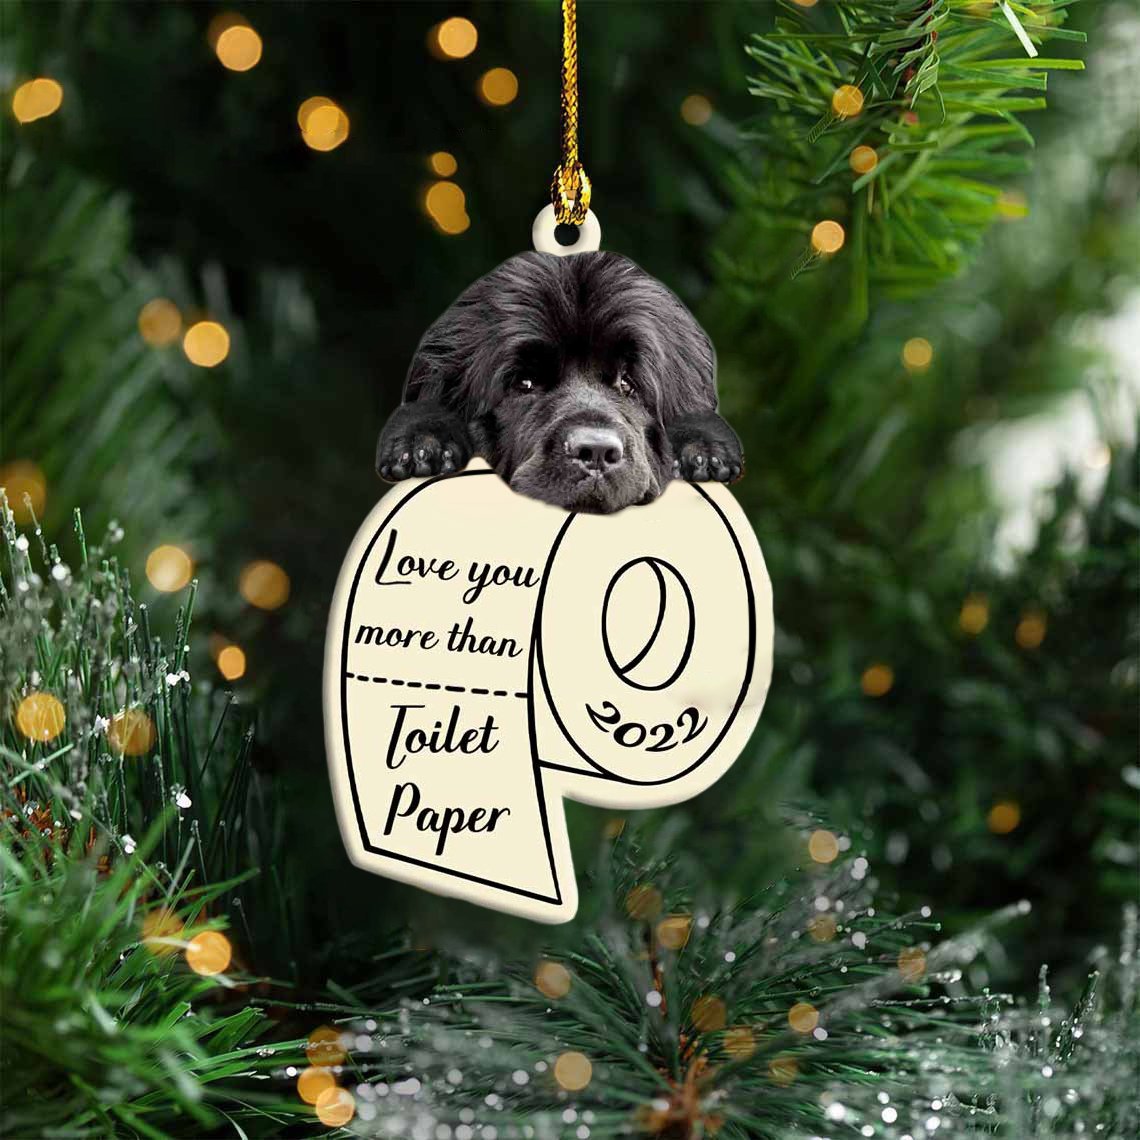 Newfoundland Love You More Than Toilet Paper 2022 Hanging Ornament